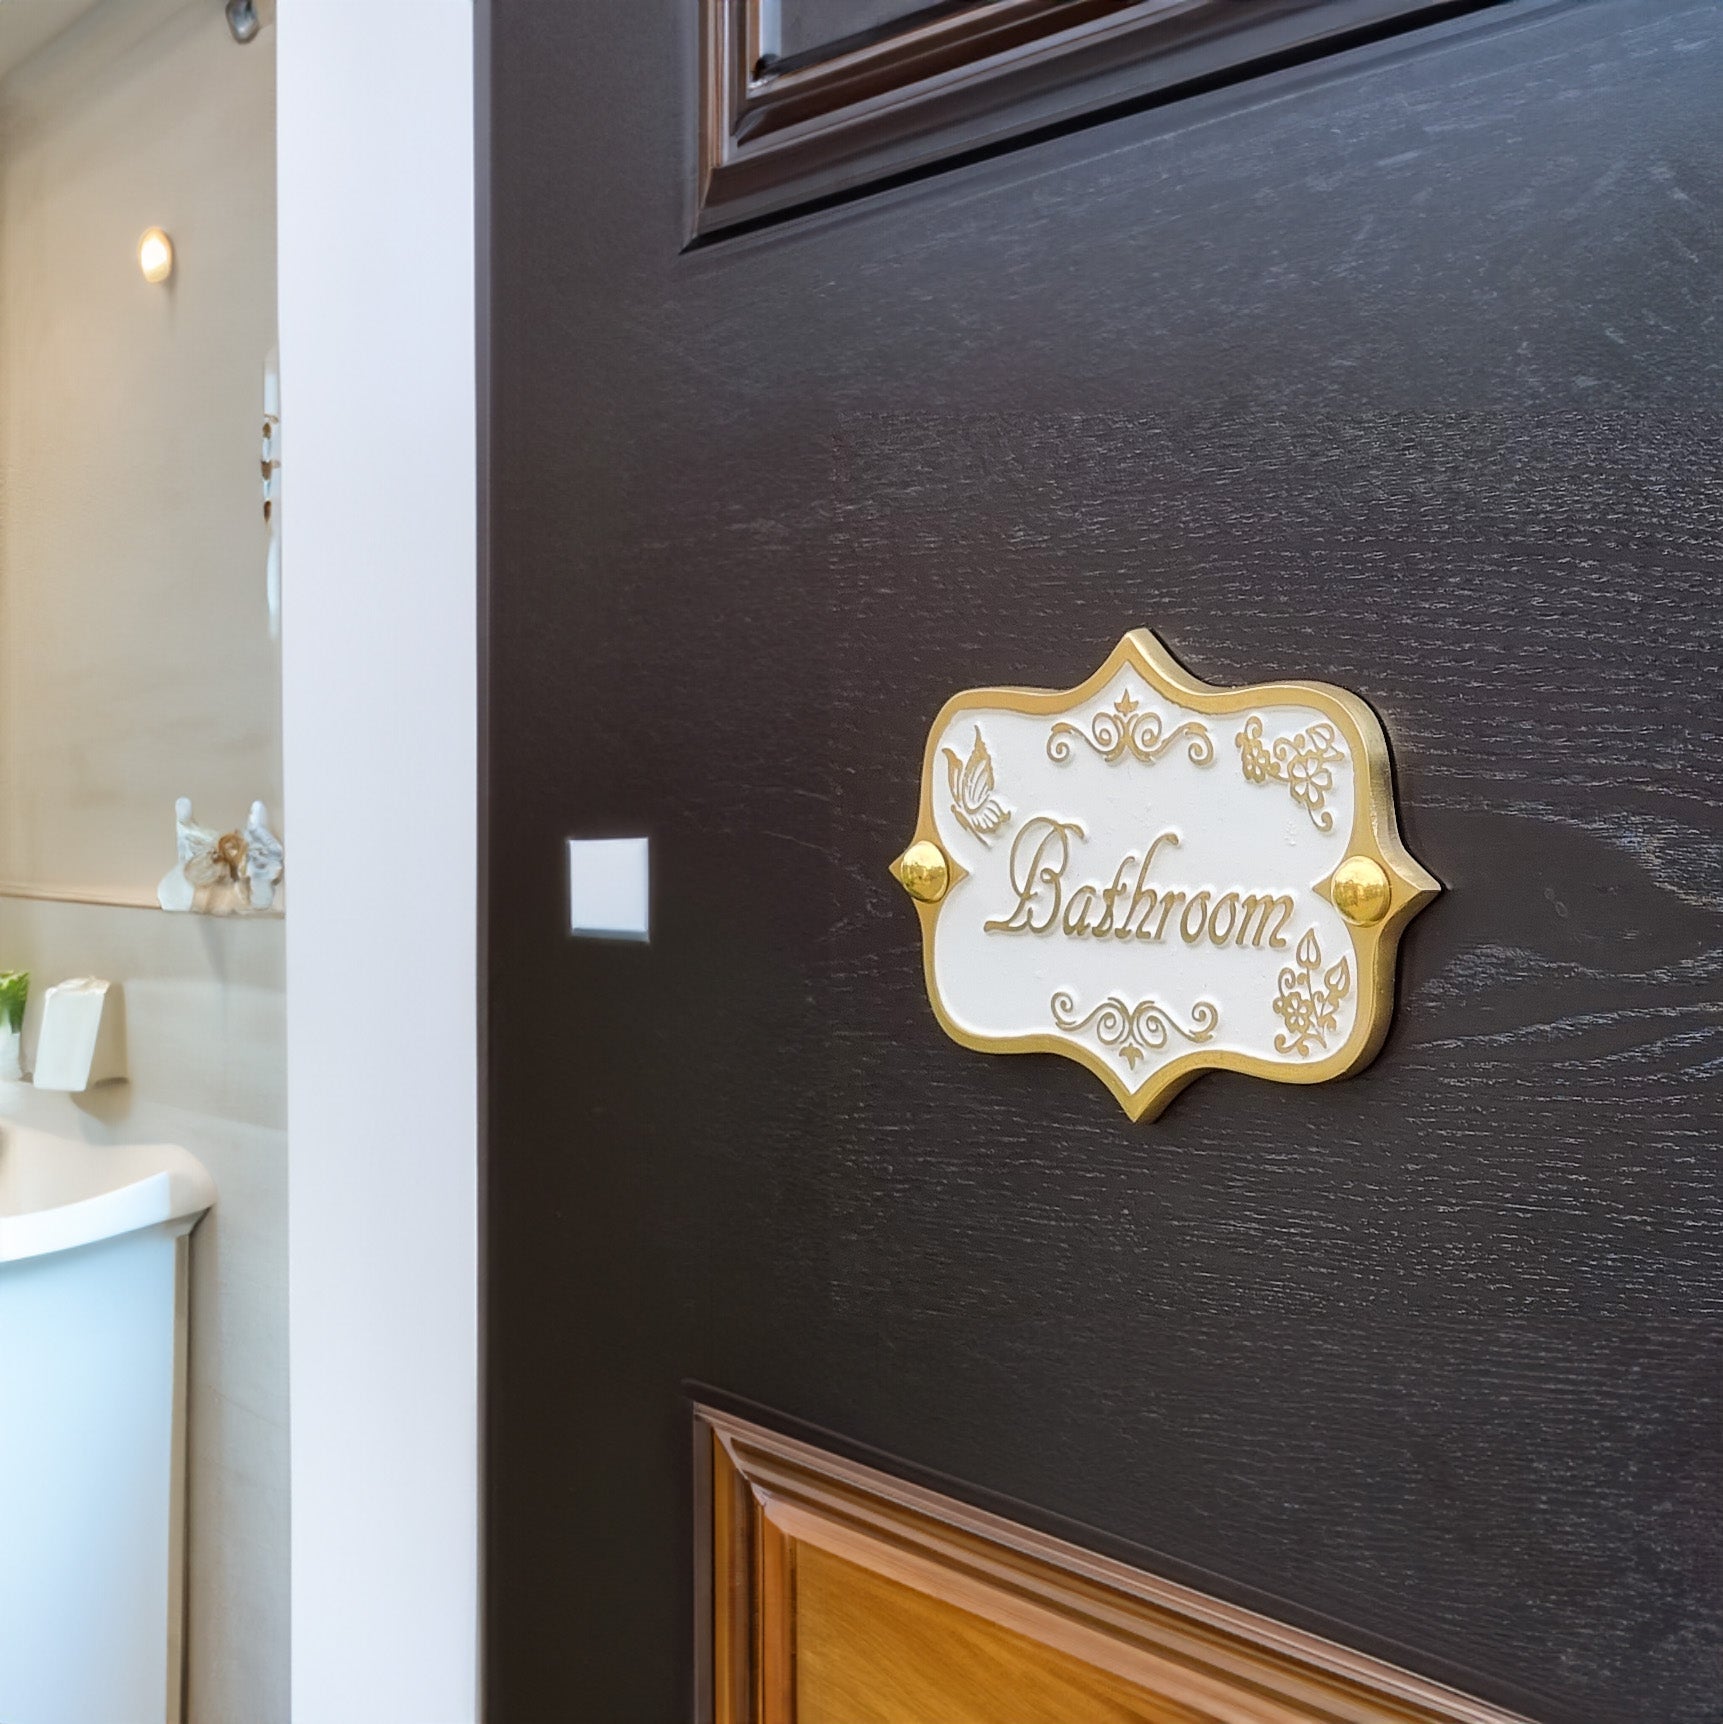 Vintage 'Bathroom' Sign - The Metal Foundry